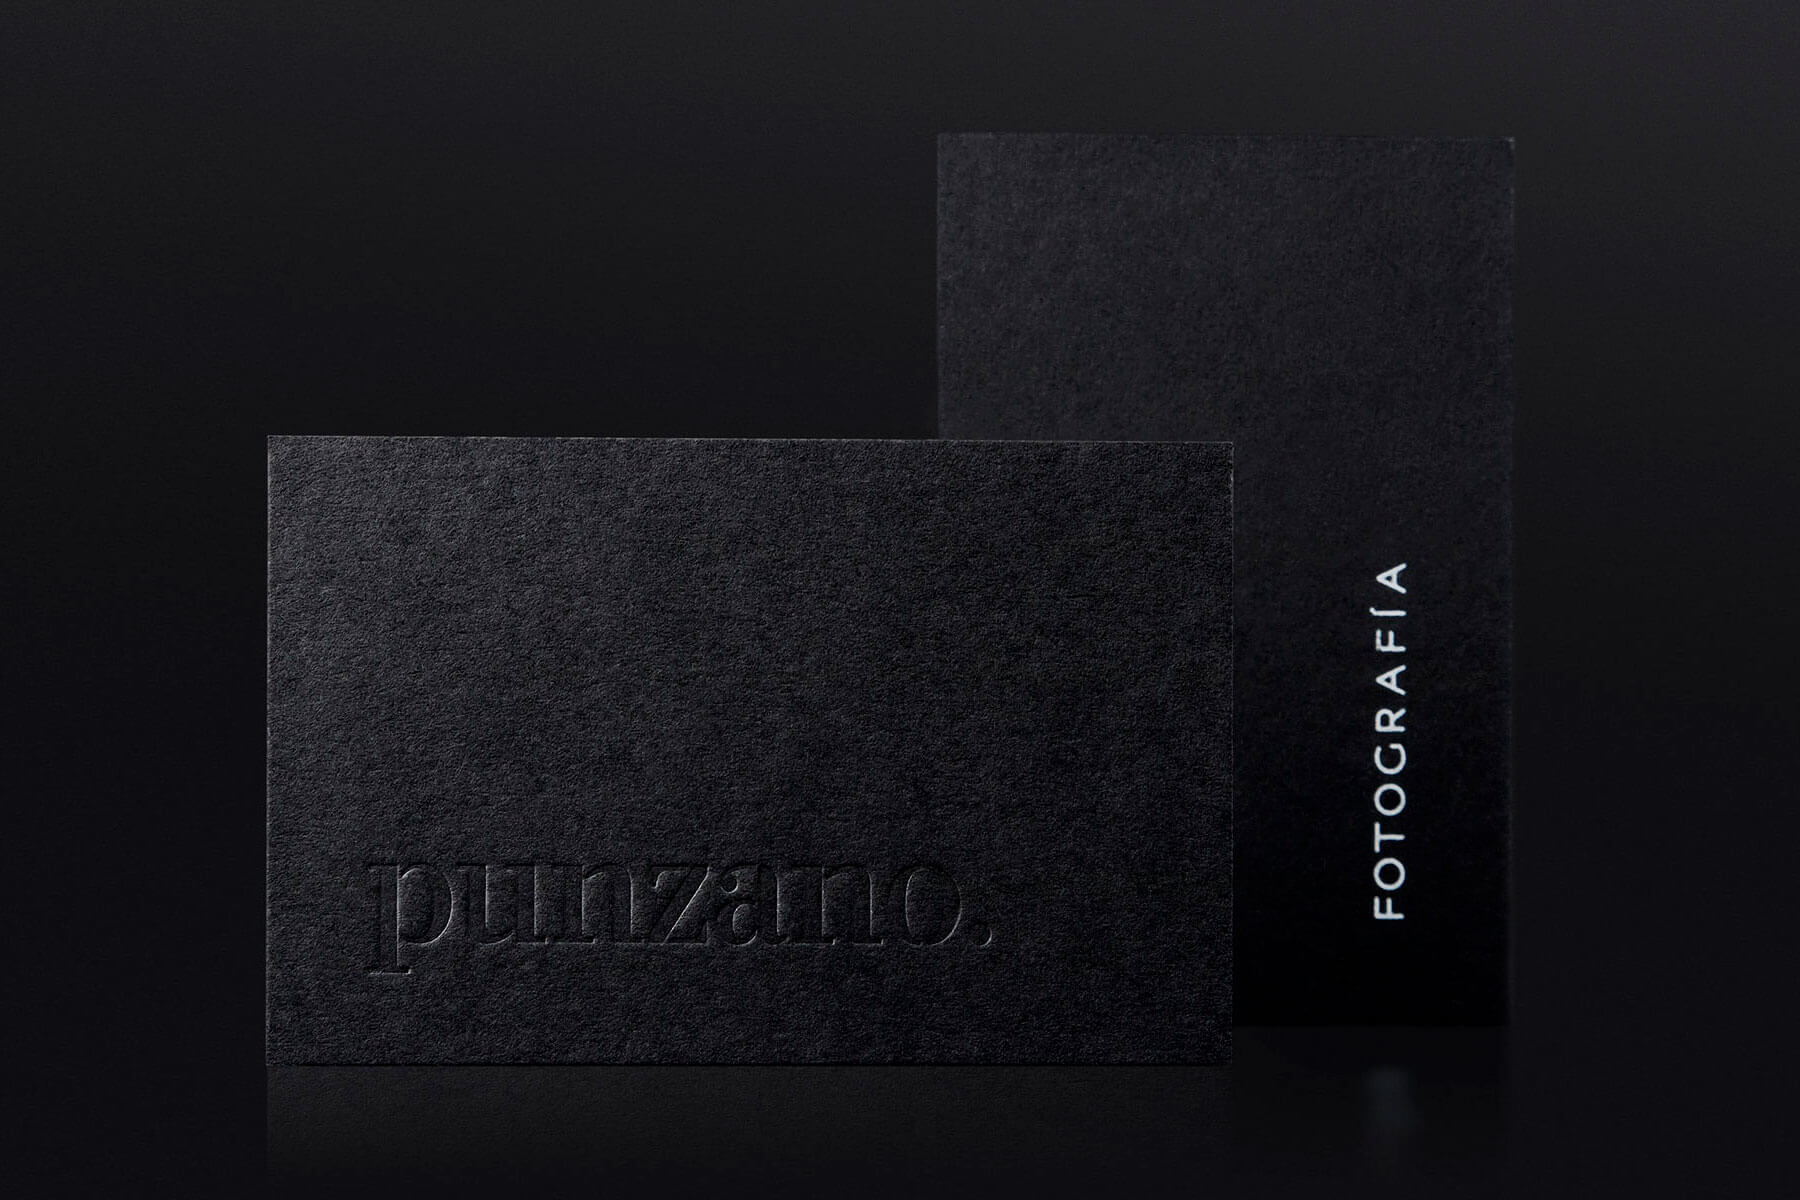 Business card with new logo of the photography studio Punzano